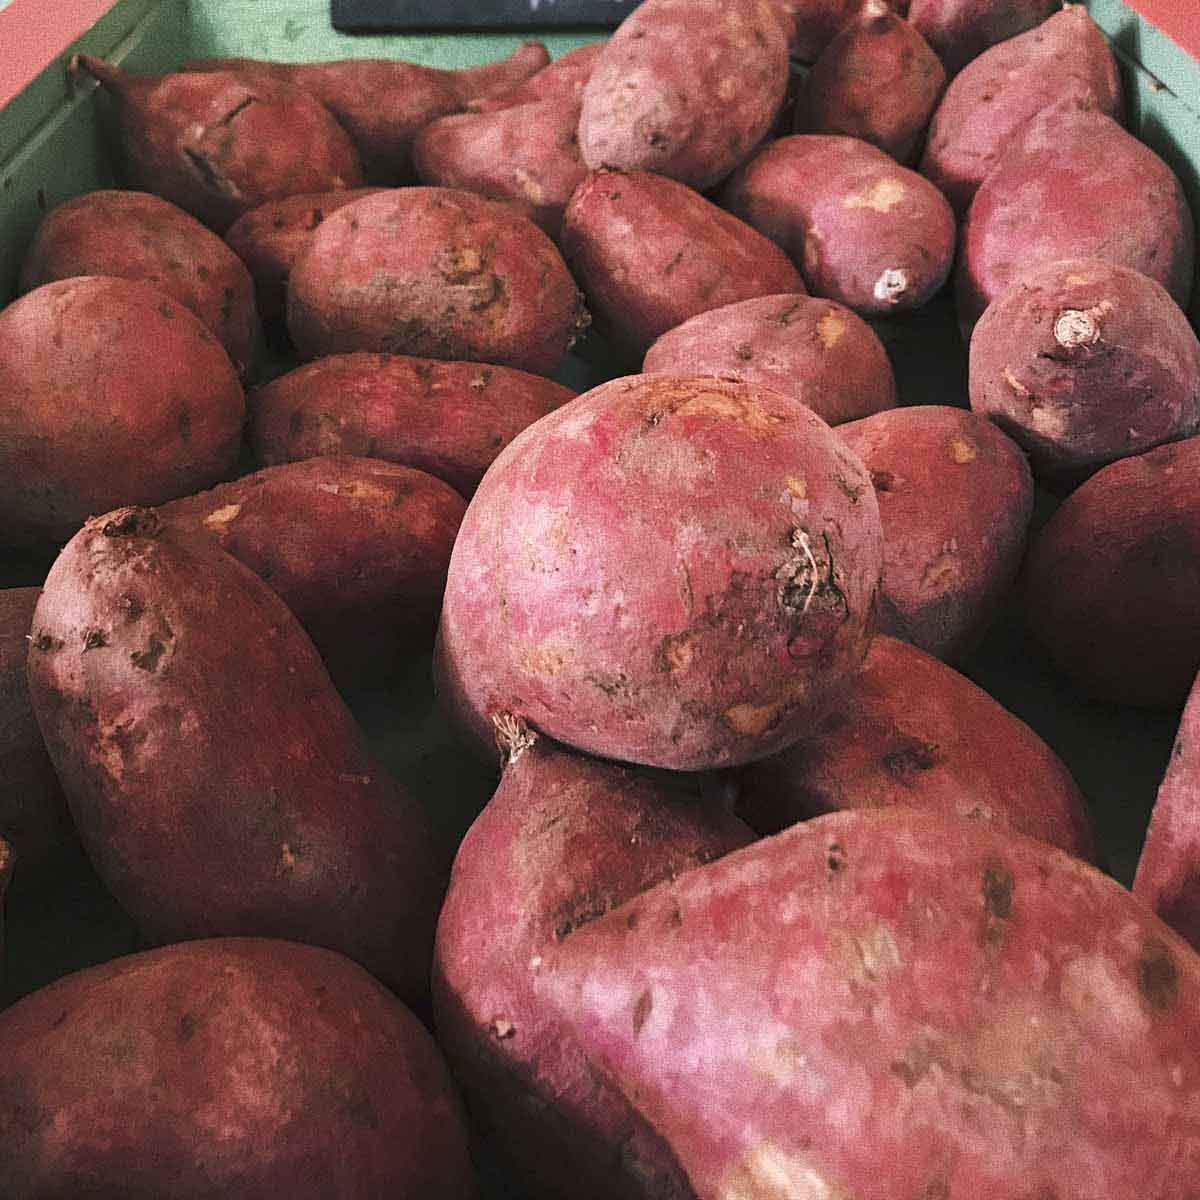 Red sweet potatoes fill a green crate.